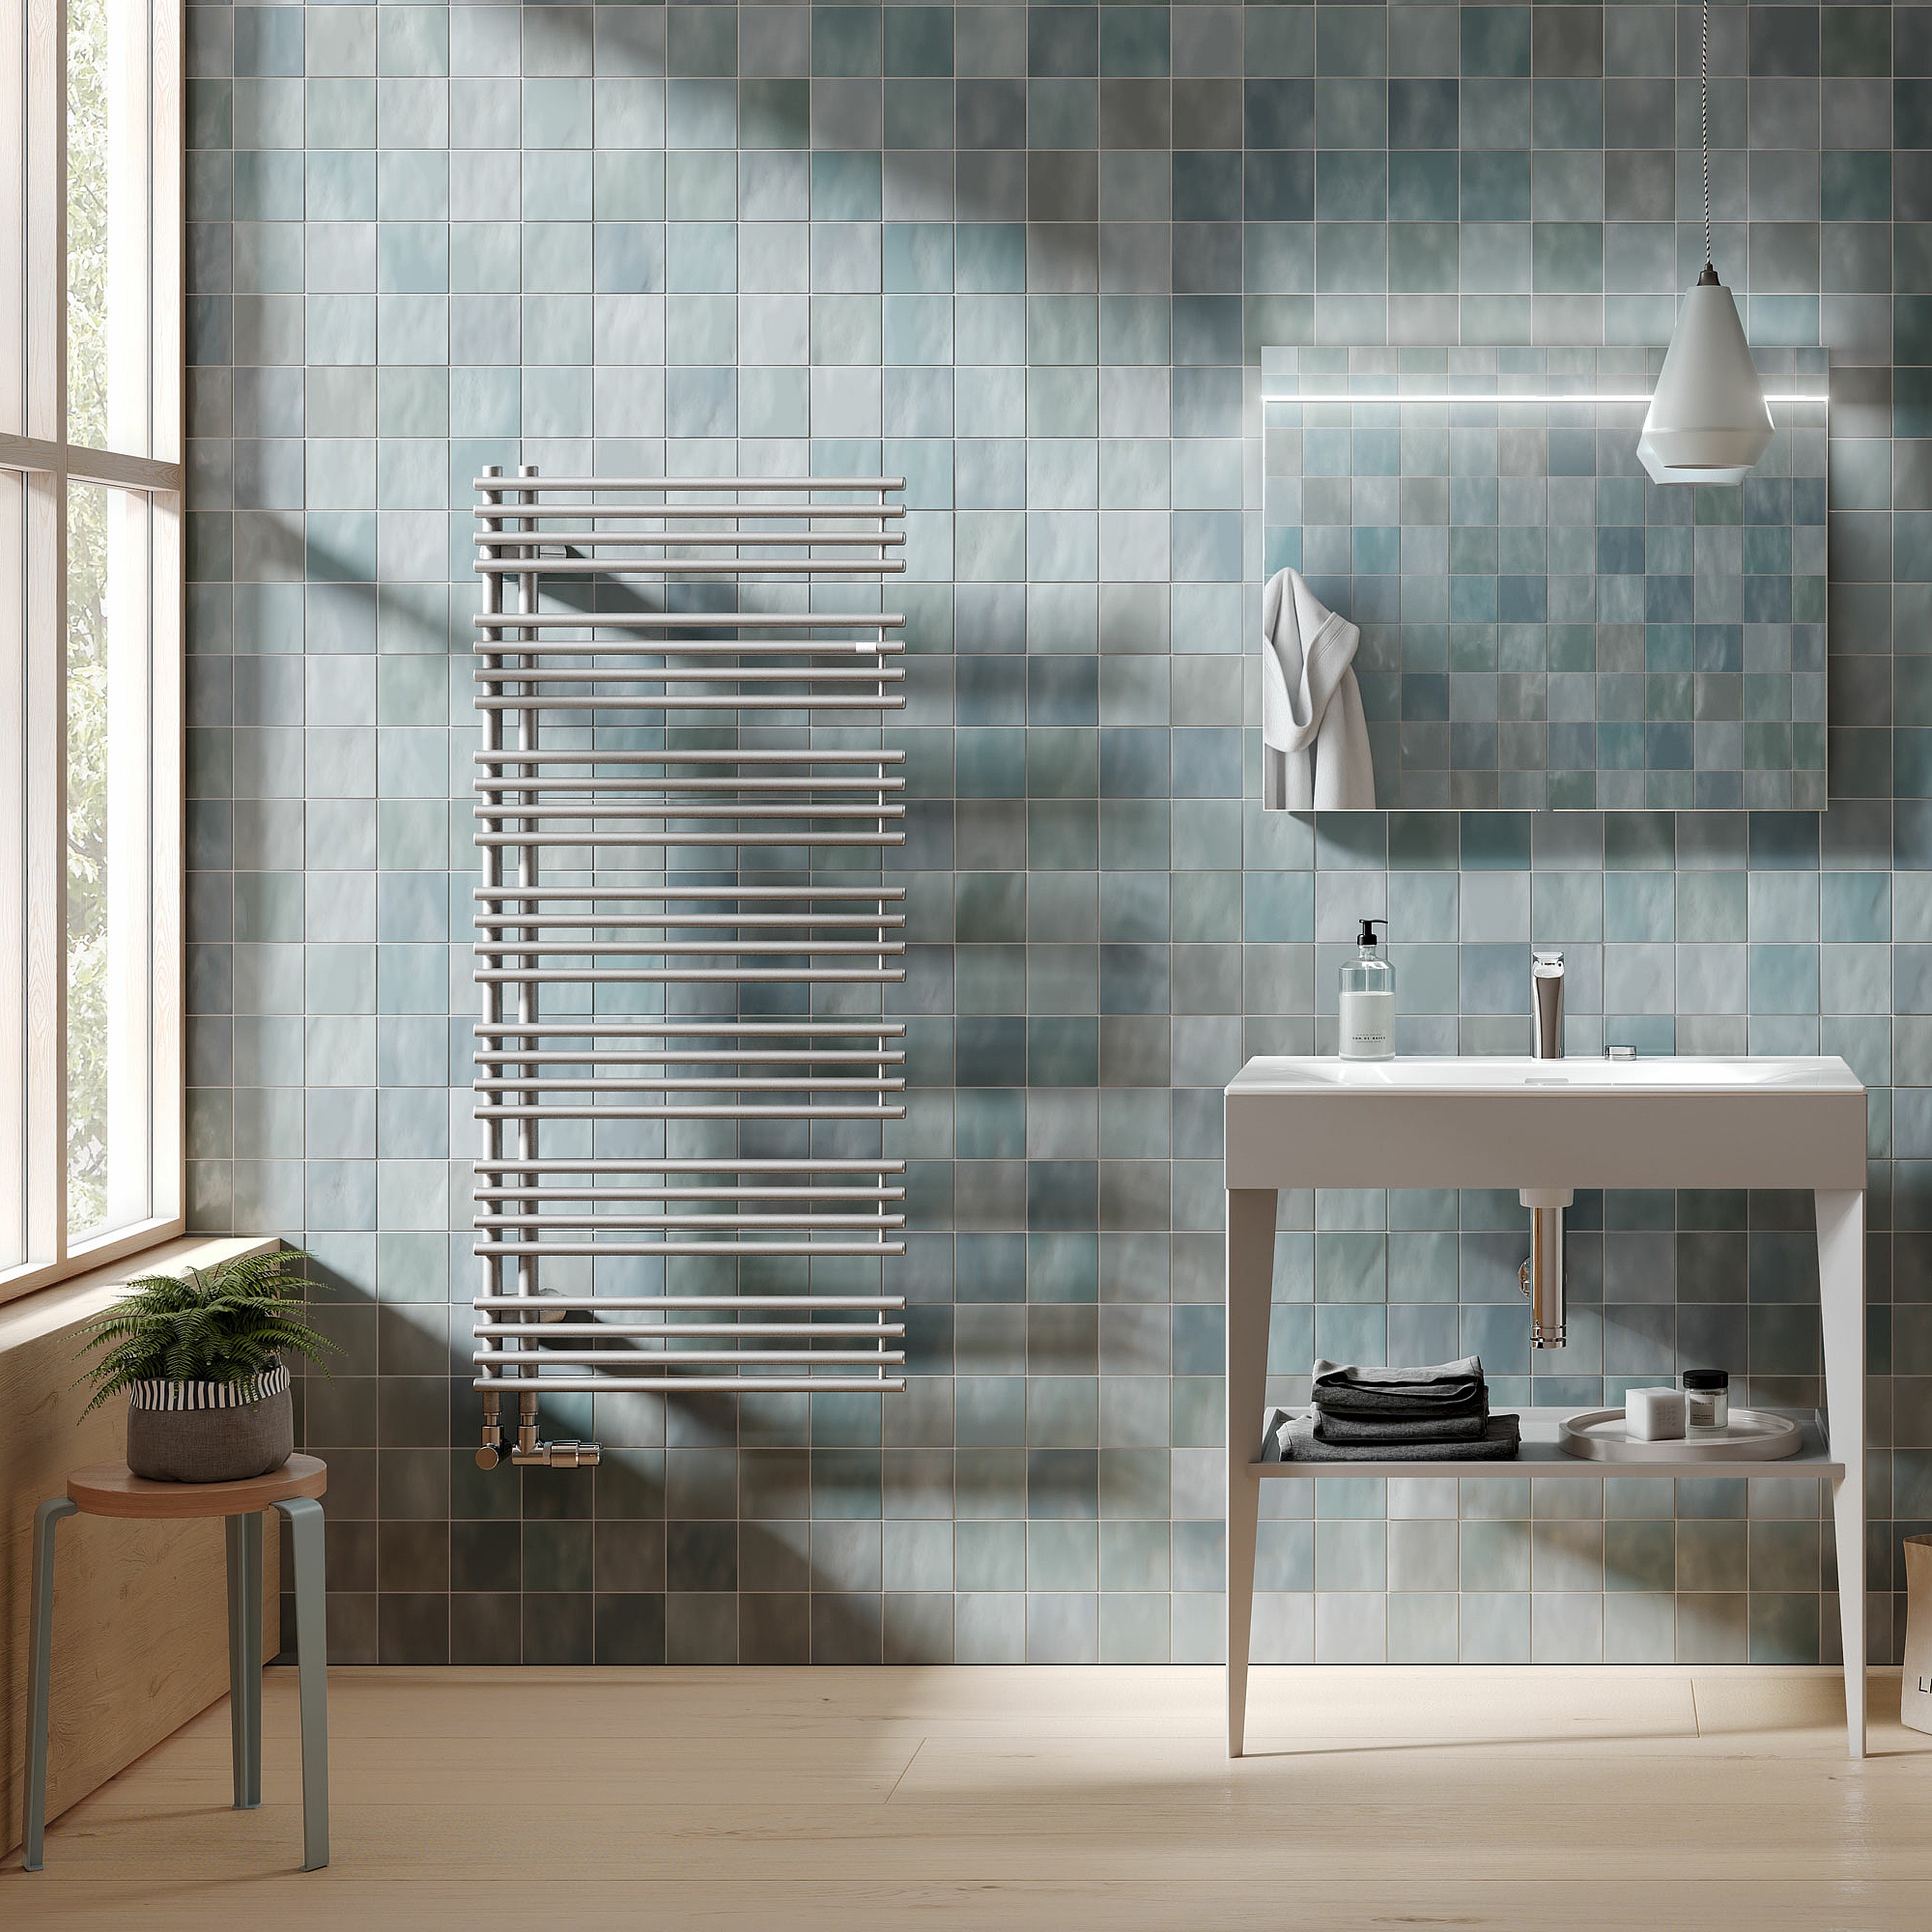 Kermi Diveo design and bathroom radiators – functionality and comfort rolled into one.